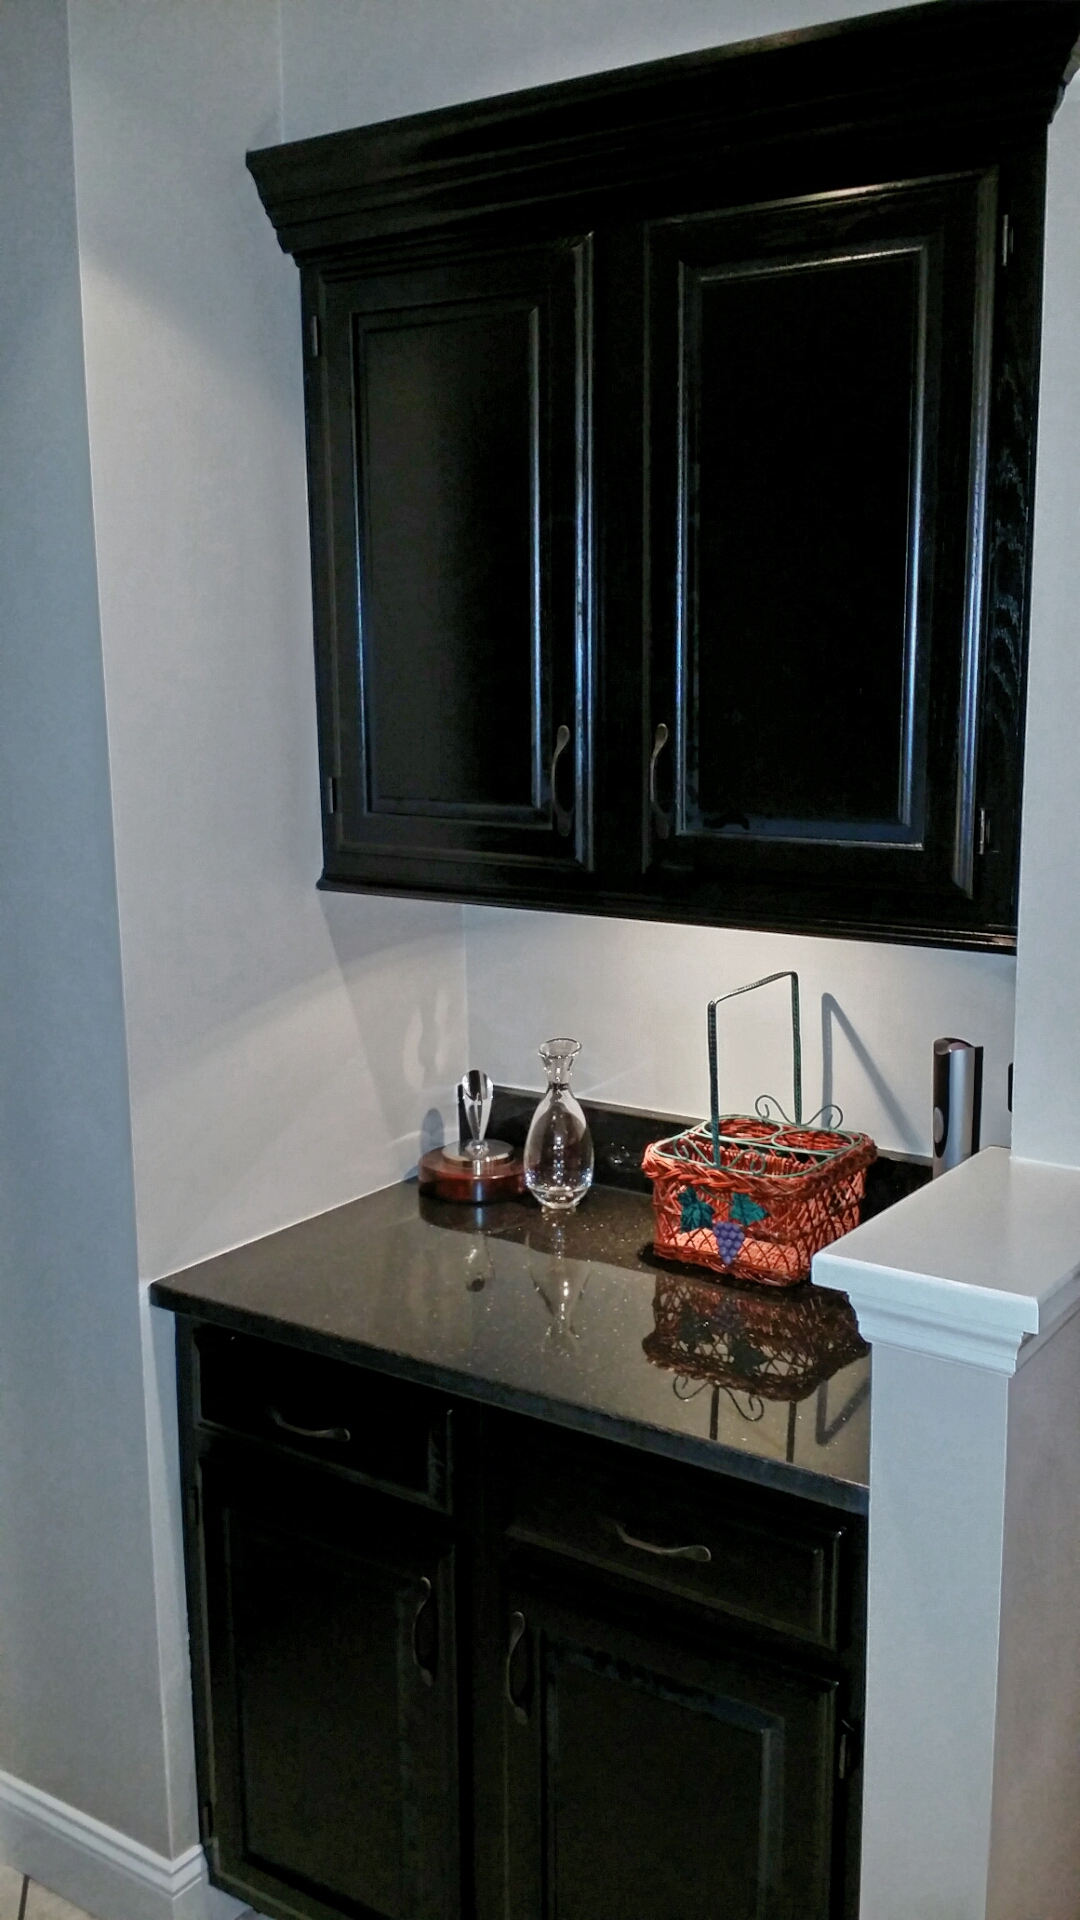 About Cabinet Refinishing And Carm Interiors